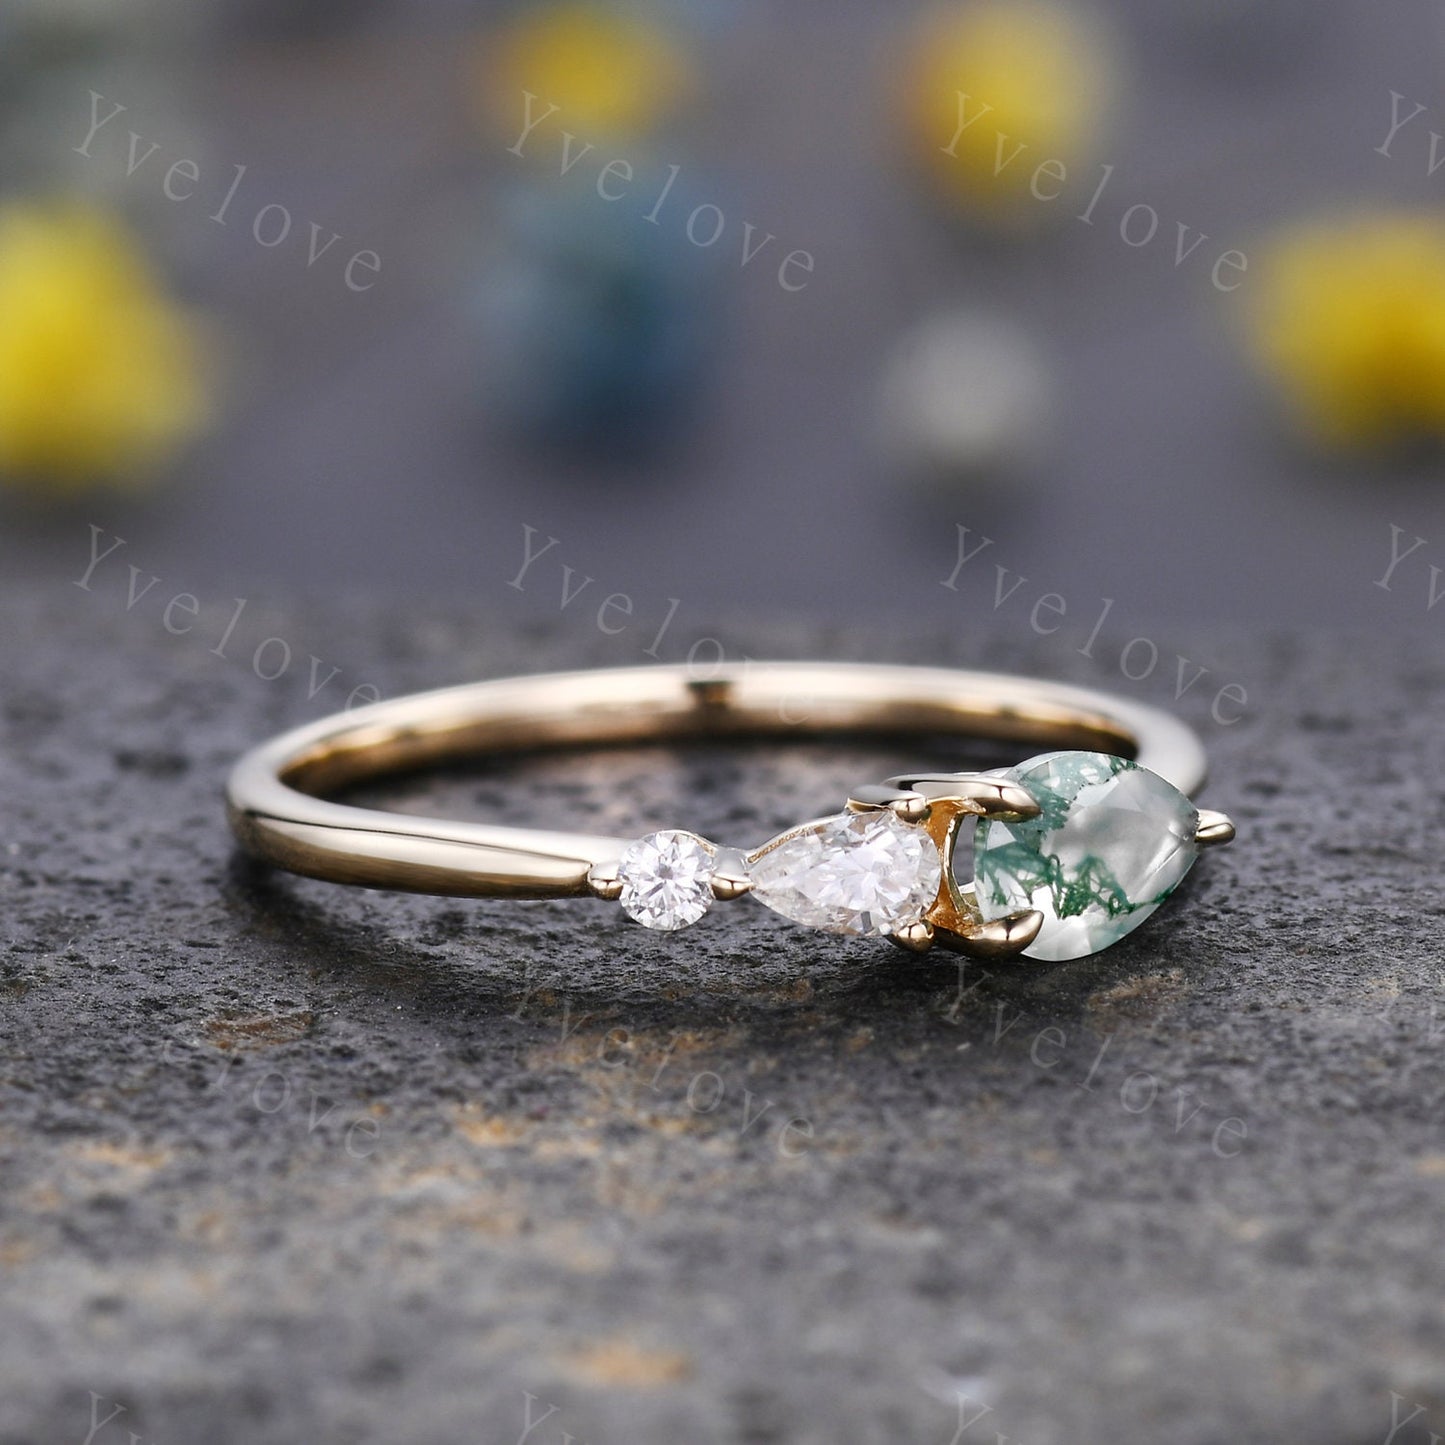 Vintage Moss Agate Ring Engagement Ring,Pear Cut Gems,Art Deco Moissanite Wedding Band,3 Stone Unique Women Bridal Promise Ring,Rose gold